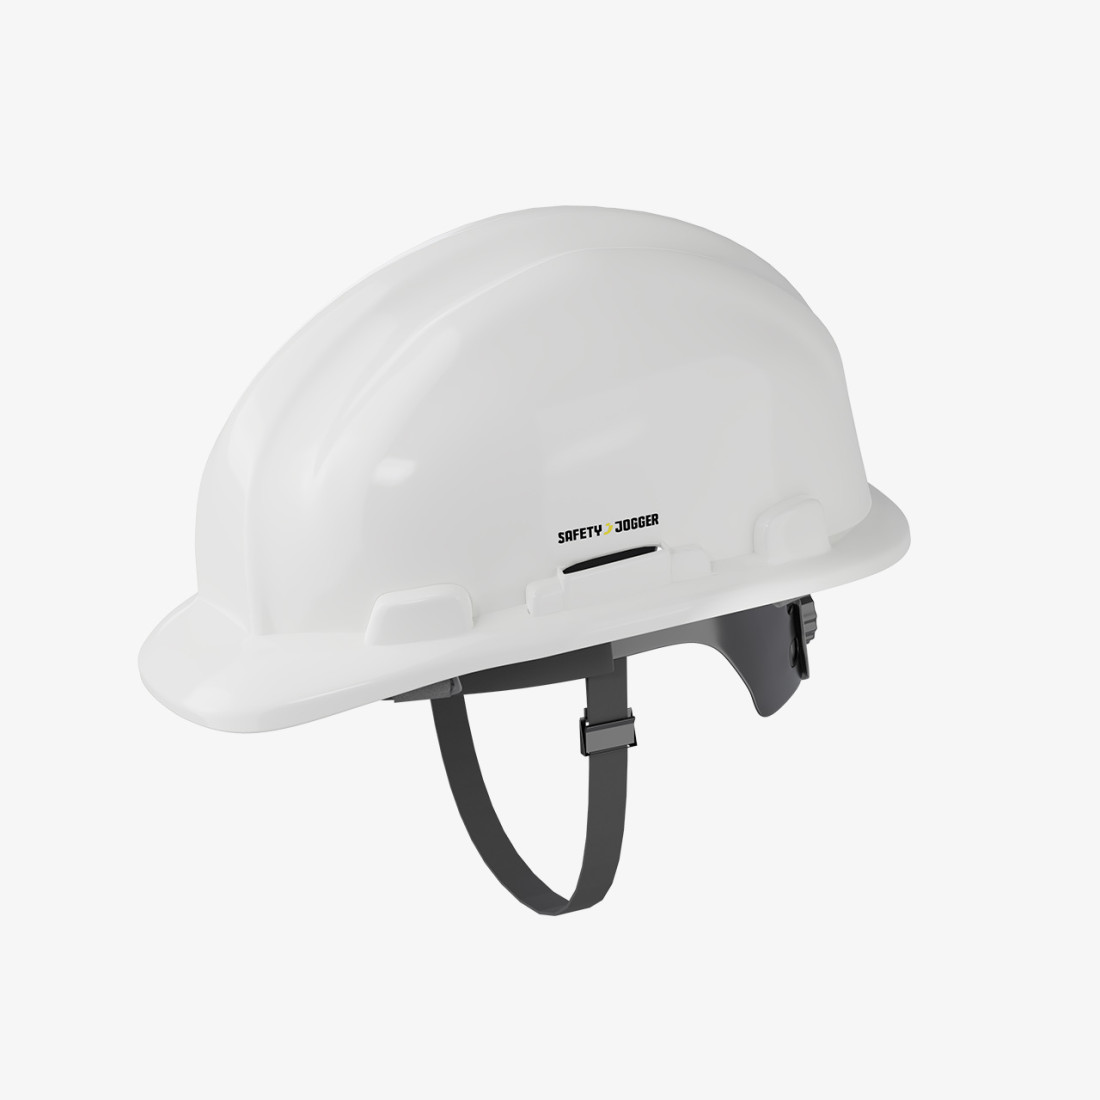 KANHALWS Lightweight Safety Helmet - Personal protection